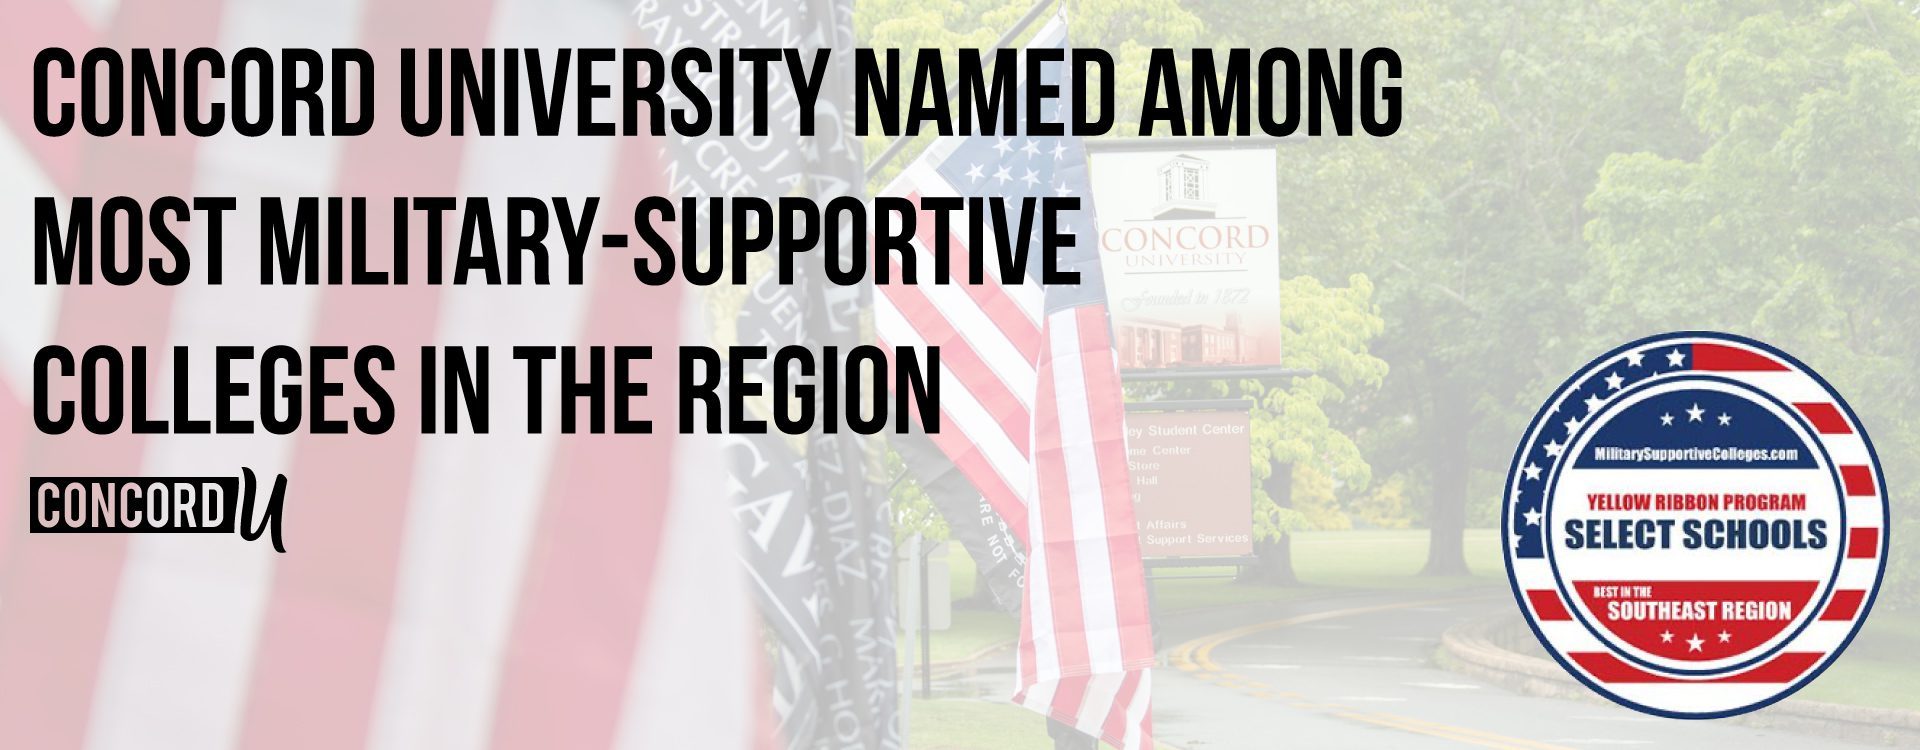 Concord University named among most military supportive colleges in the region